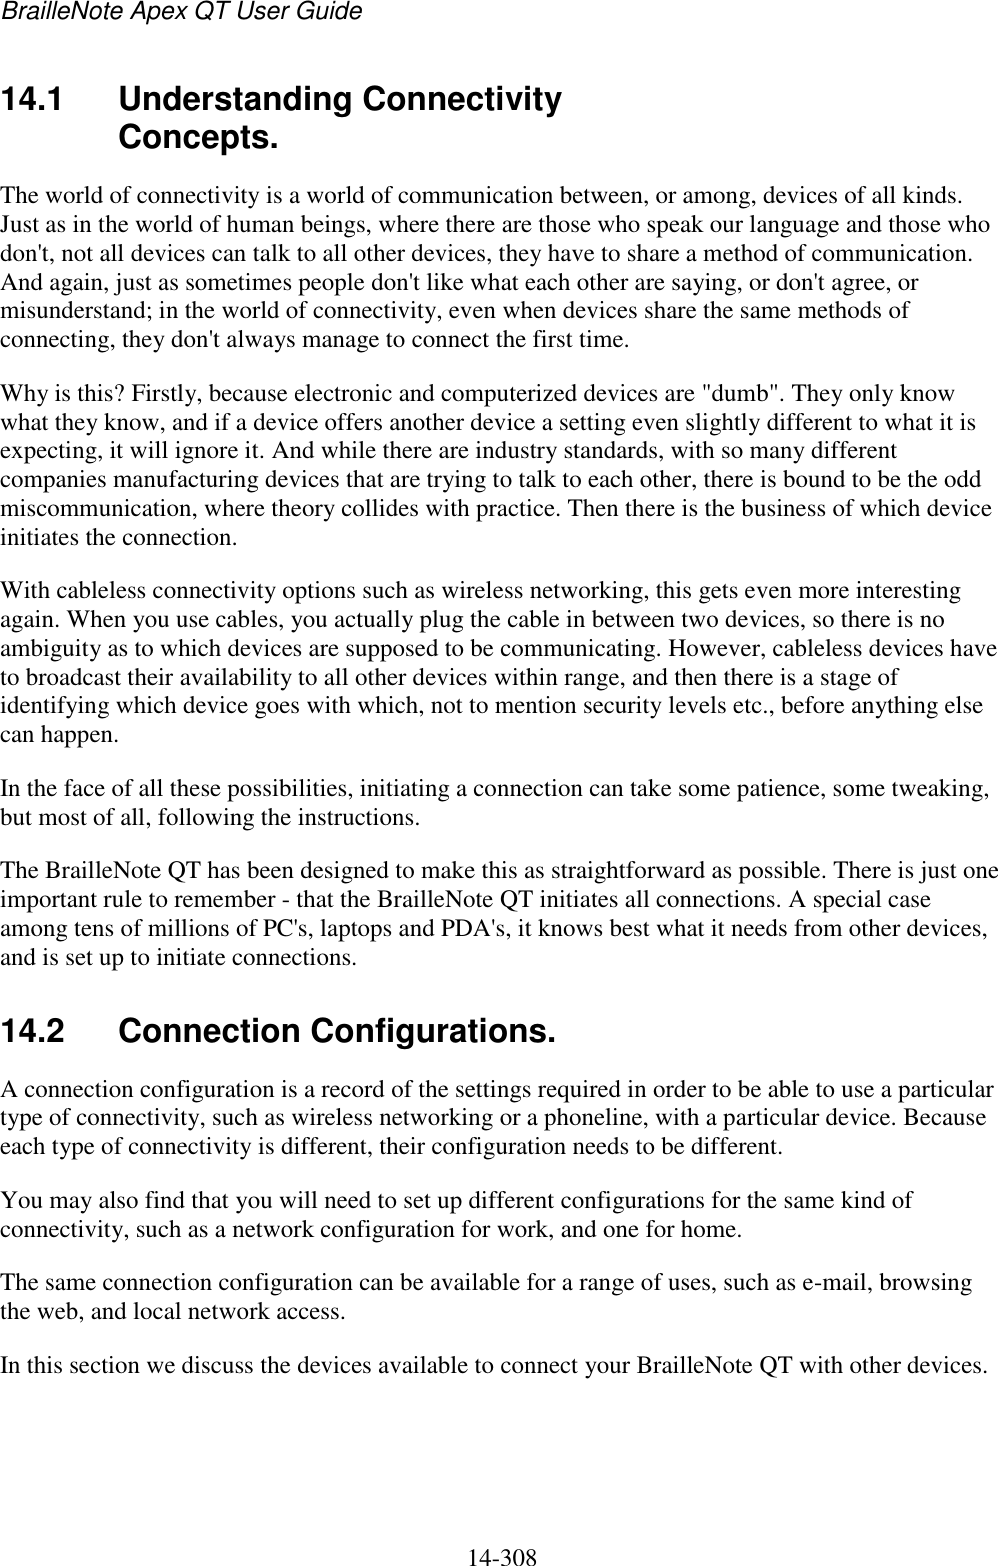 BrailleNote Apex QT User Guide  14-308   14.1 Understanding Connectivity Concepts. The world of connectivity is a world of communication between, or among, devices of all kinds. Just as in the world of human beings, where there are those who speak our language and those who don&apos;t, not all devices can talk to all other devices, they have to share a method of communication. And again, just as sometimes people don&apos;t like what each other are saying, or don&apos;t agree, or misunderstand; in the world of connectivity, even when devices share the same methods of connecting, they don&apos;t always manage to connect the first time. Why is this? Firstly, because electronic and computerized devices are &quot;dumb&quot;. They only know what they know, and if a device offers another device a setting even slightly different to what it is expecting, it will ignore it. And while there are industry standards, with so many different companies manufacturing devices that are trying to talk to each other, there is bound to be the odd miscommunication, where theory collides with practice. Then there is the business of which device initiates the connection. With cableless connectivity options such as wireless networking, this gets even more interesting again. When you use cables, you actually plug the cable in between two devices, so there is no ambiguity as to which devices are supposed to be communicating. However, cableless devices have to broadcast their availability to all other devices within range, and then there is a stage of identifying which device goes with which, not to mention security levels etc., before anything else can happen. In the face of all these possibilities, initiating a connection can take some patience, some tweaking, but most of all, following the instructions. The BrailleNote QT has been designed to make this as straightforward as possible. There is just one important rule to remember - that the BrailleNote QT initiates all connections. A special case among tens of millions of PC&apos;s, laptops and PDA&apos;s, it knows best what it needs from other devices, and is set up to initiate connections.  14.2  Connection Configurations. A connection configuration is a record of the settings required in order to be able to use a particular type of connectivity, such as wireless networking or a phoneline, with a particular device. Because each type of connectivity is different, their configuration needs to be different. You may also find that you will need to set up different configurations for the same kind of connectivity, such as a network configuration for work, and one for home. The same connection configuration can be available for a range of uses, such as e-mail, browsing the web, and local network access. In this section we discuss the devices available to connect your BrailleNote QT with other devices.   